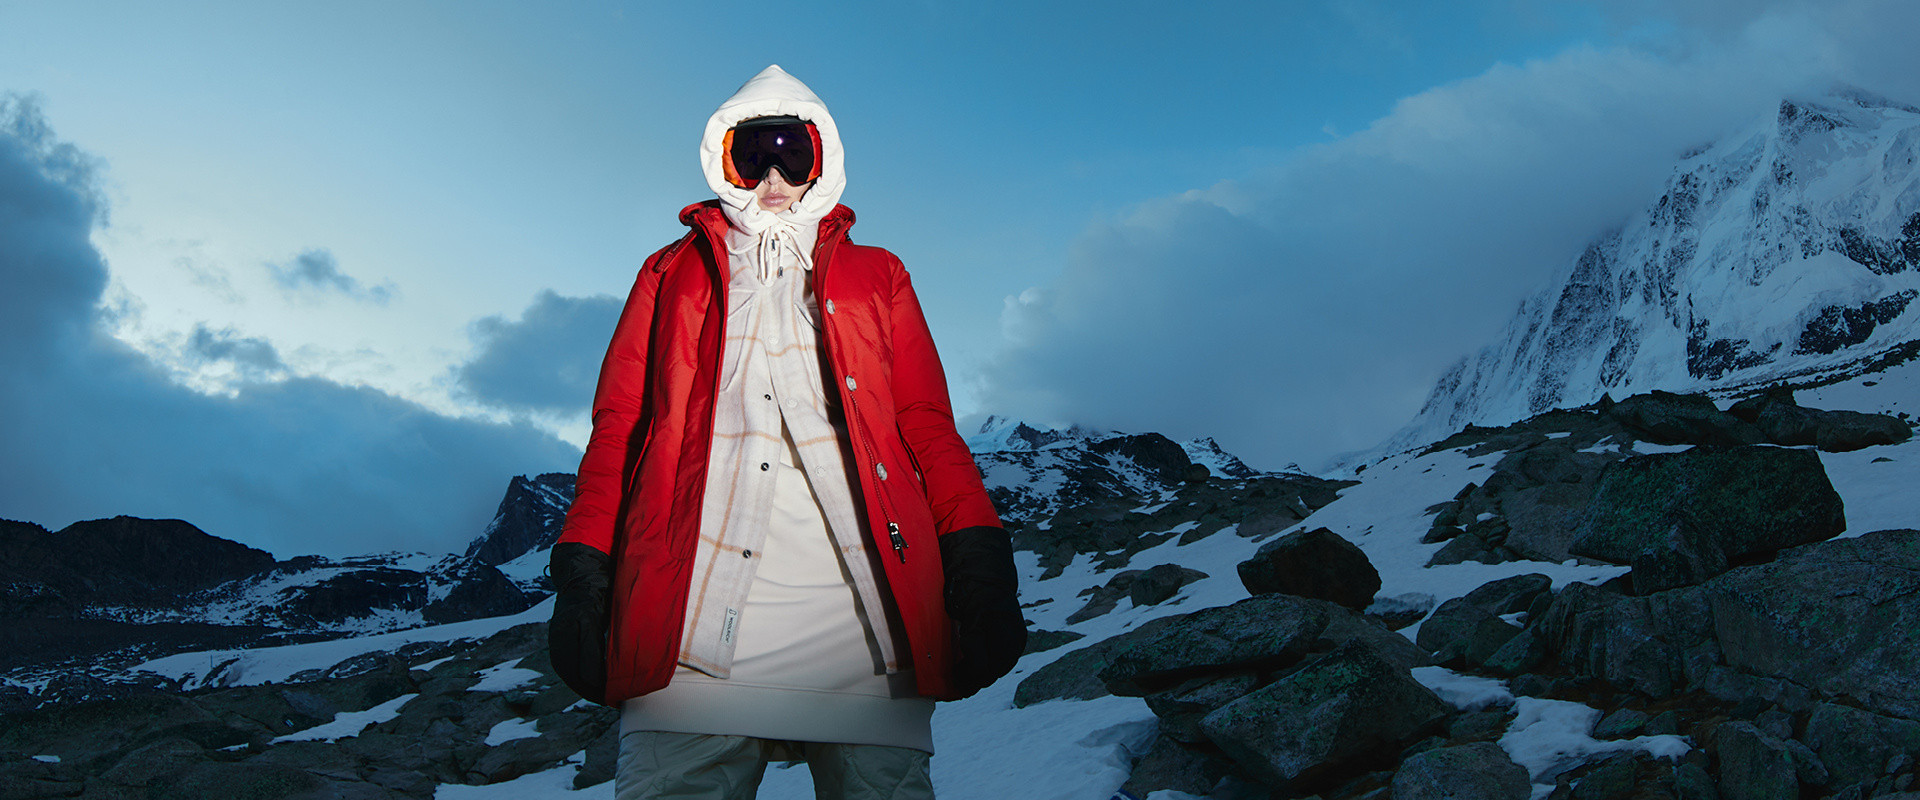 Woolrich Parka - An icon since the 70s | Woolrich USA